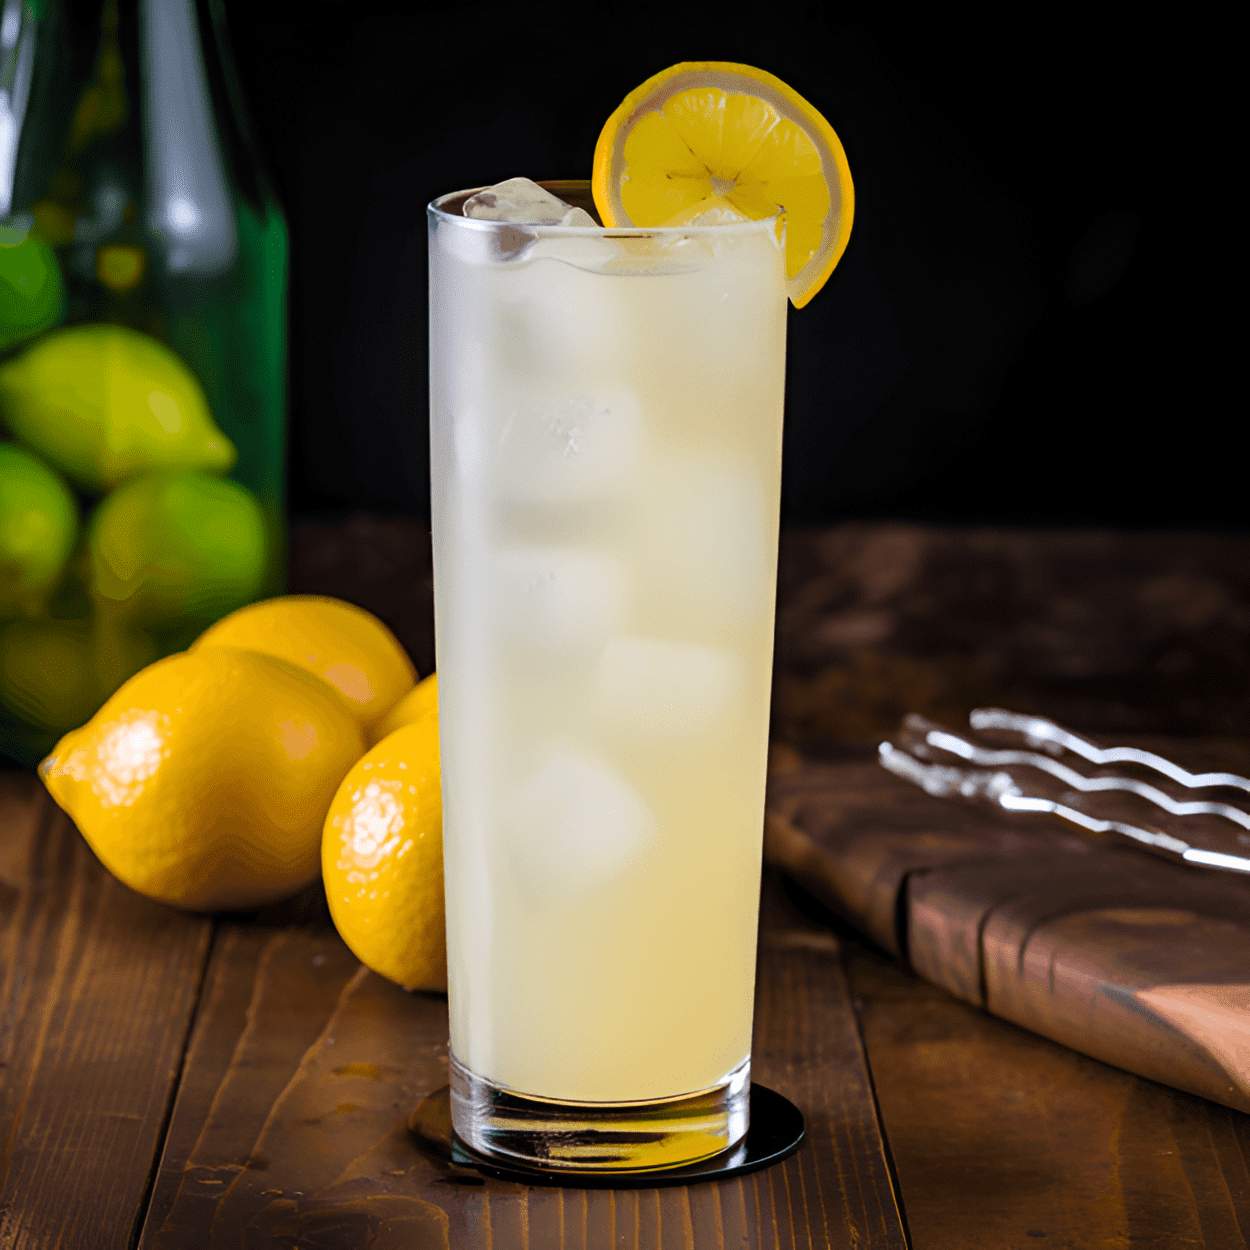 Yucca Vodka Cocktail Recipe - The Yucca Vodka Cocktail is a sweet and tangy drink with a strong vodka kick. It has a refreshing citrus taste with a hint of sweetness from the sugar syrup.